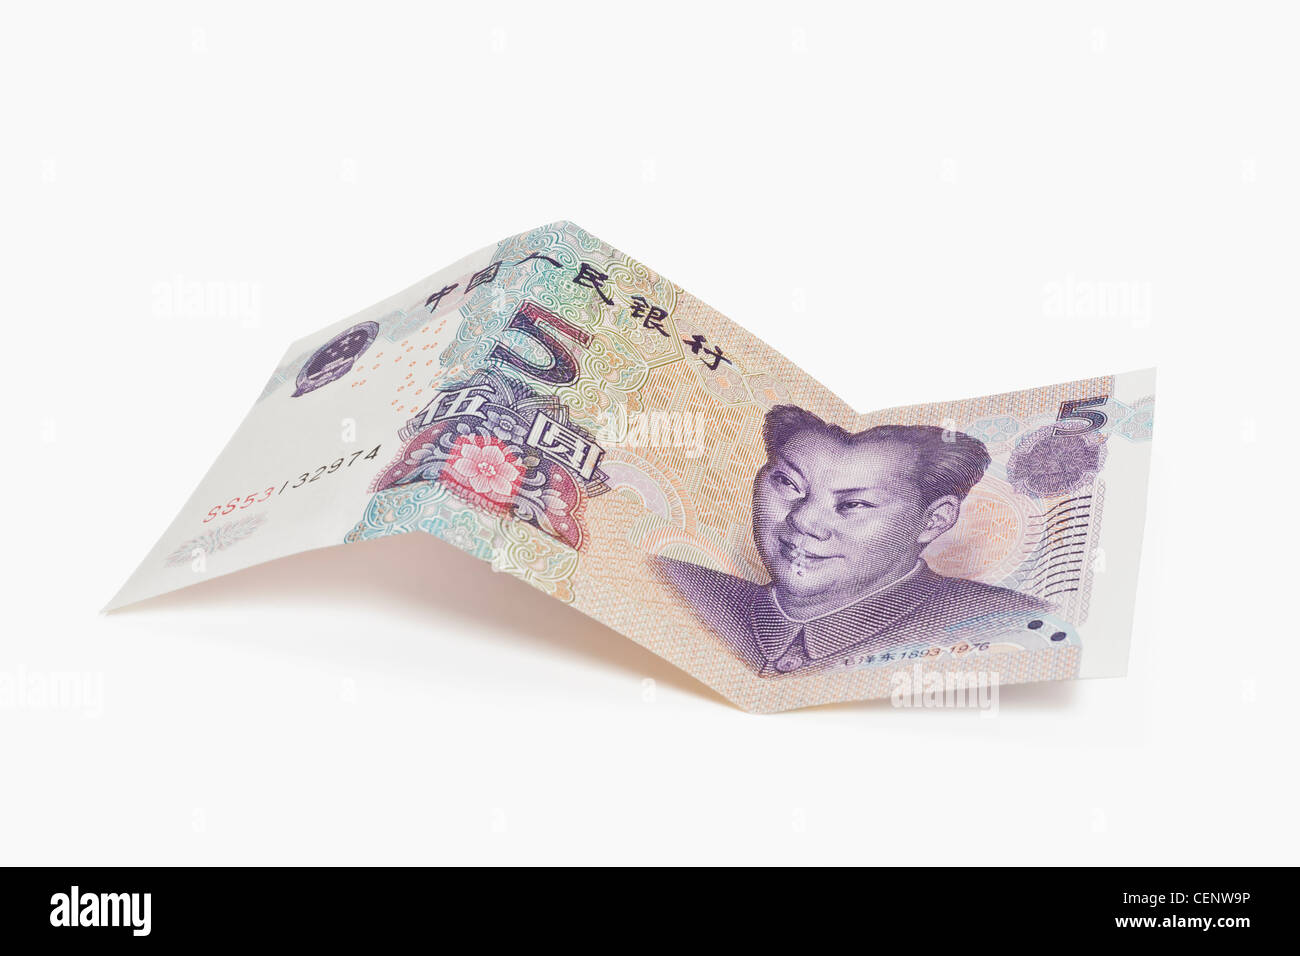 5 yuan bill with the portrait of Mao Zedong. The renminbi, the Chinese currency, was introduced in 1949. Stock Photo